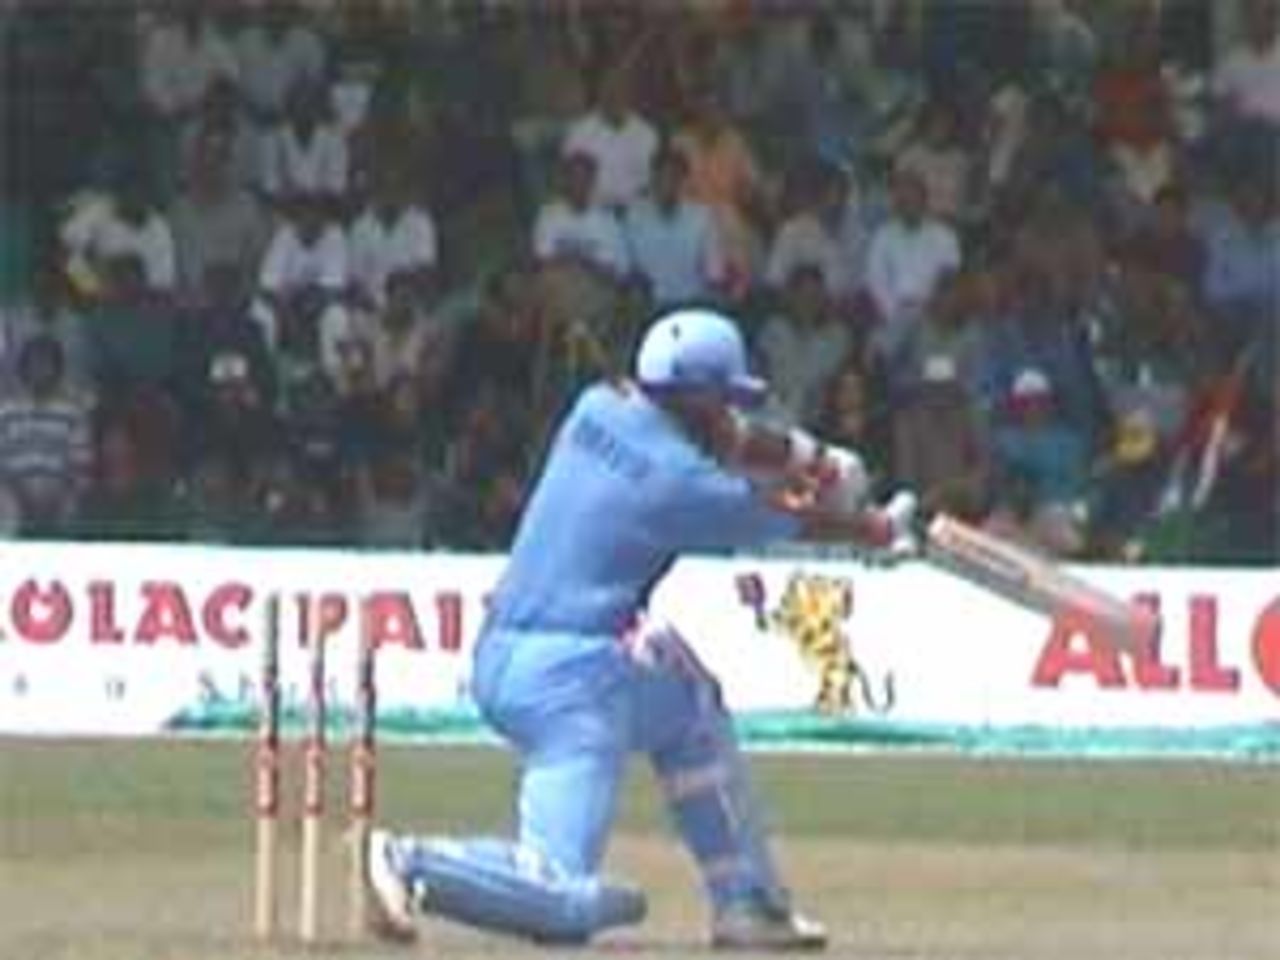 Rahul Dravid driving uppishly, only to be caught brilliantly by Campbell, India v West Indies (Final), Coca-Cola Singapore Challenge, 1999-2000, Kallang Ground, Singapore, 7 Sep 1999.